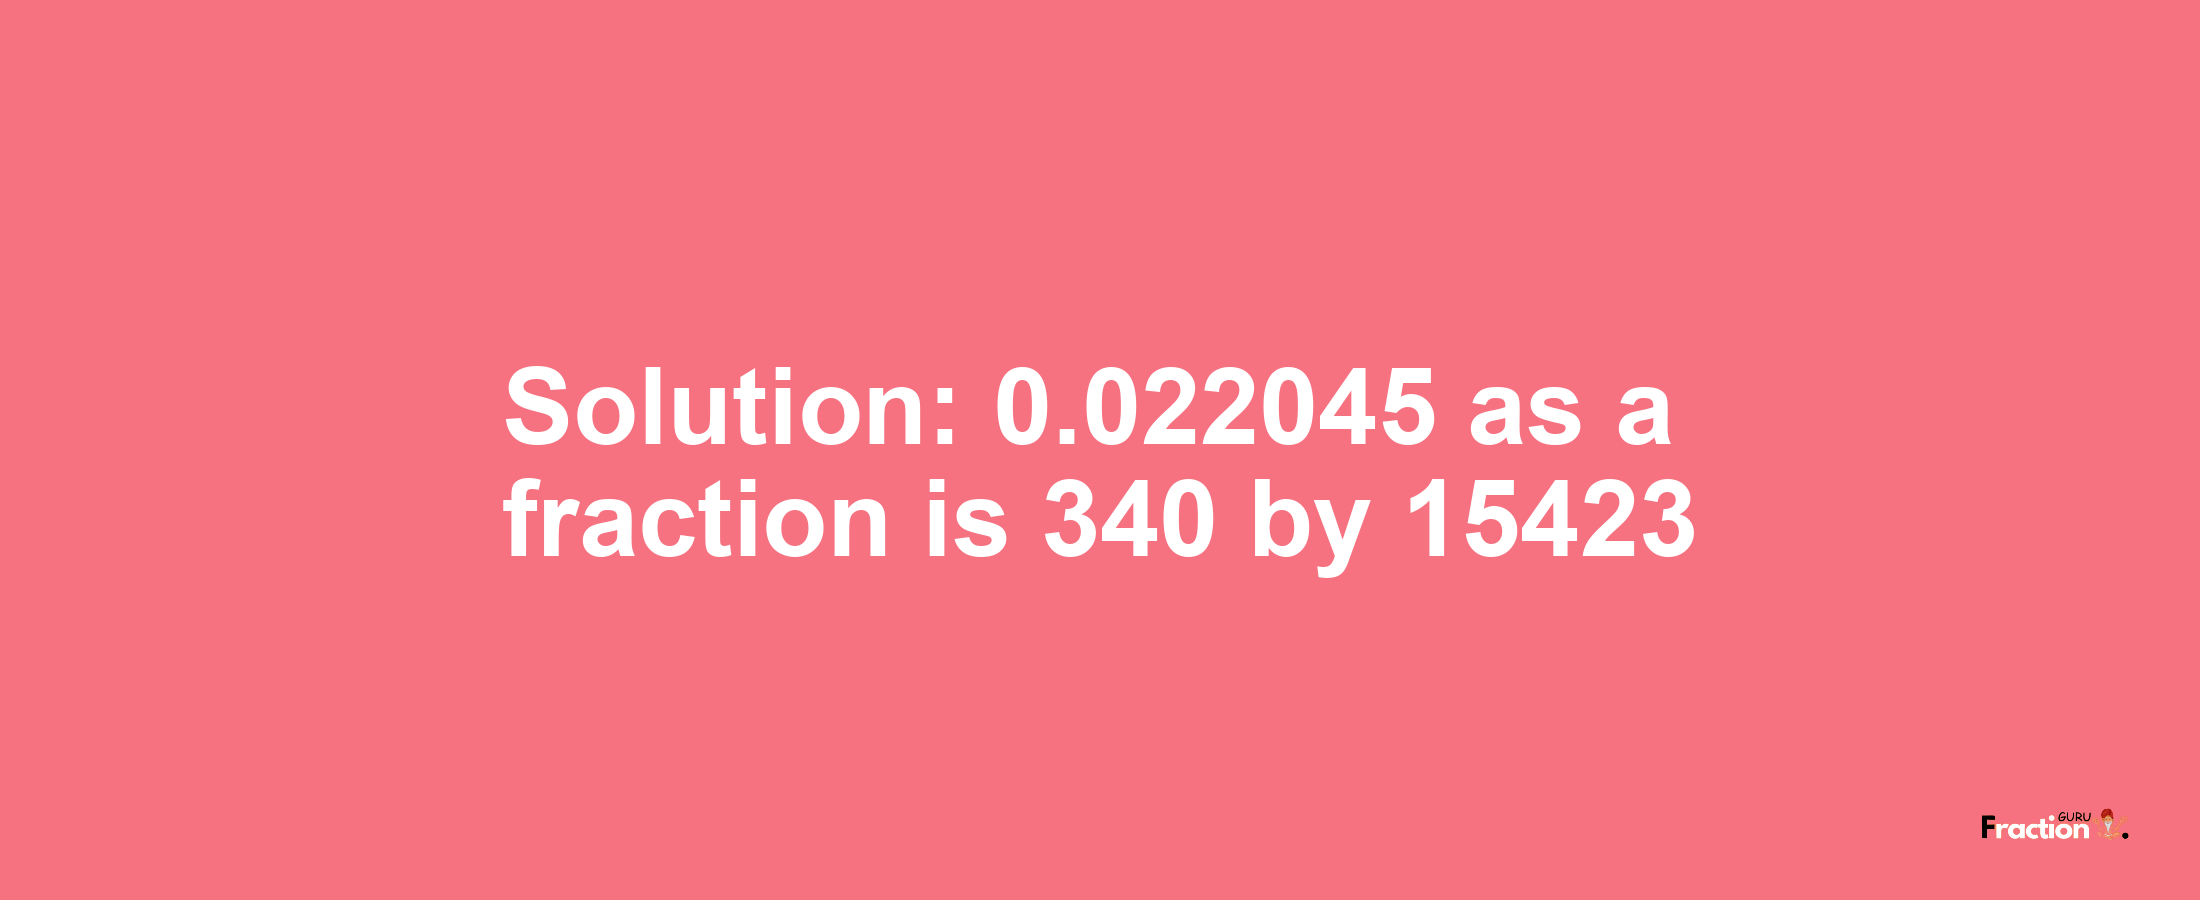 Solution:0.022045 as a fraction is 340/15423